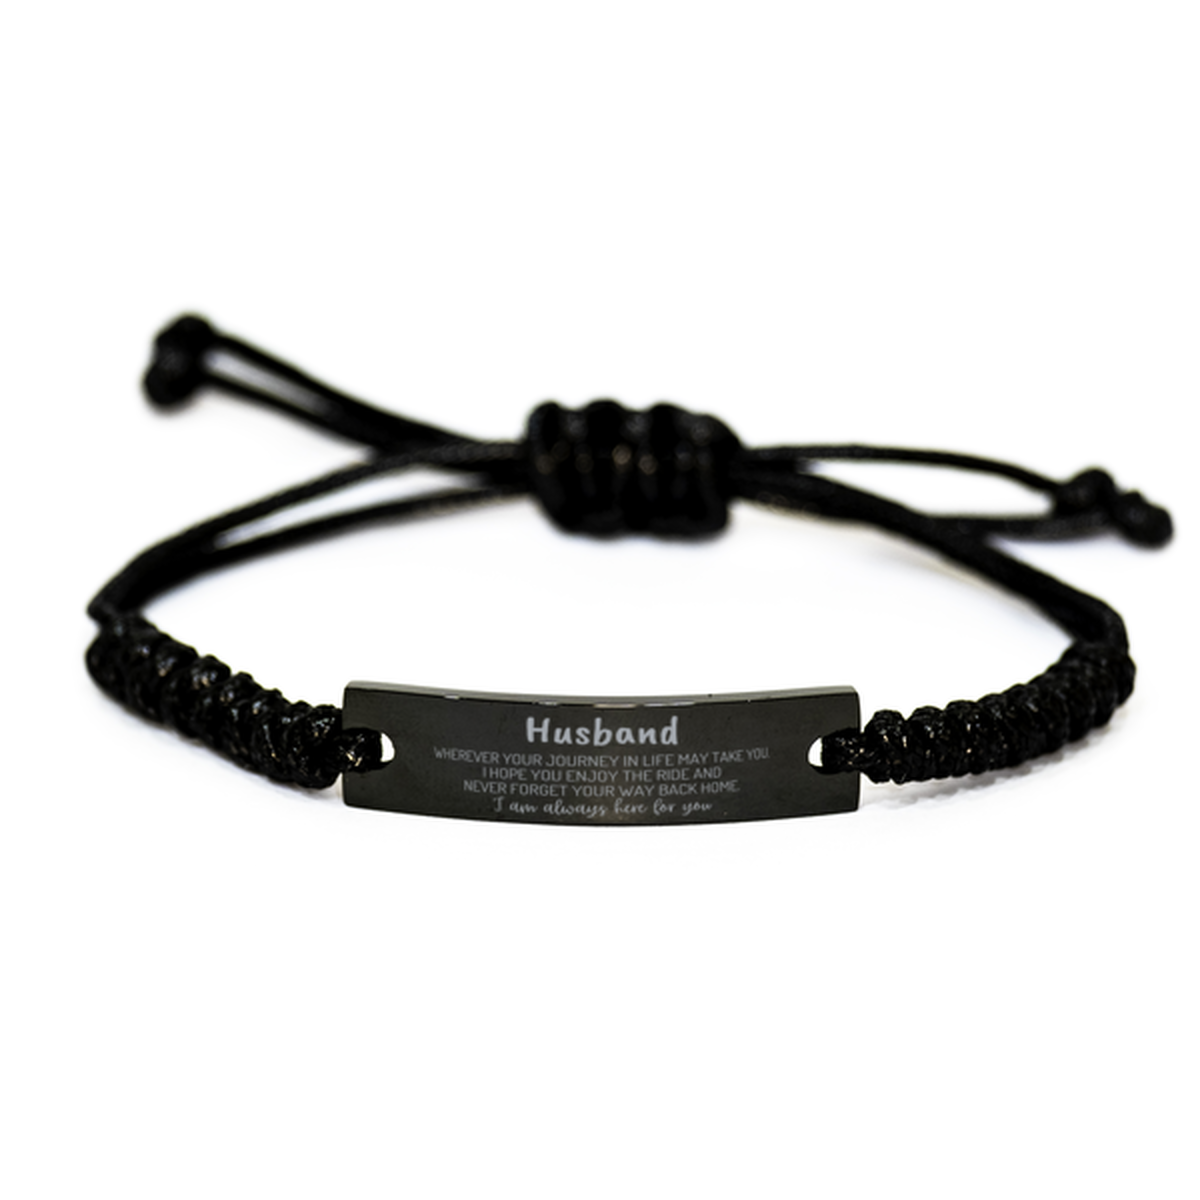 Husband wherever your journey in life may take you, I am always here for you Husband Black Rope Bracelet, Awesome Christmas Gifts For Husband, Husband Birthday Gifts for Men Women Family Loved One